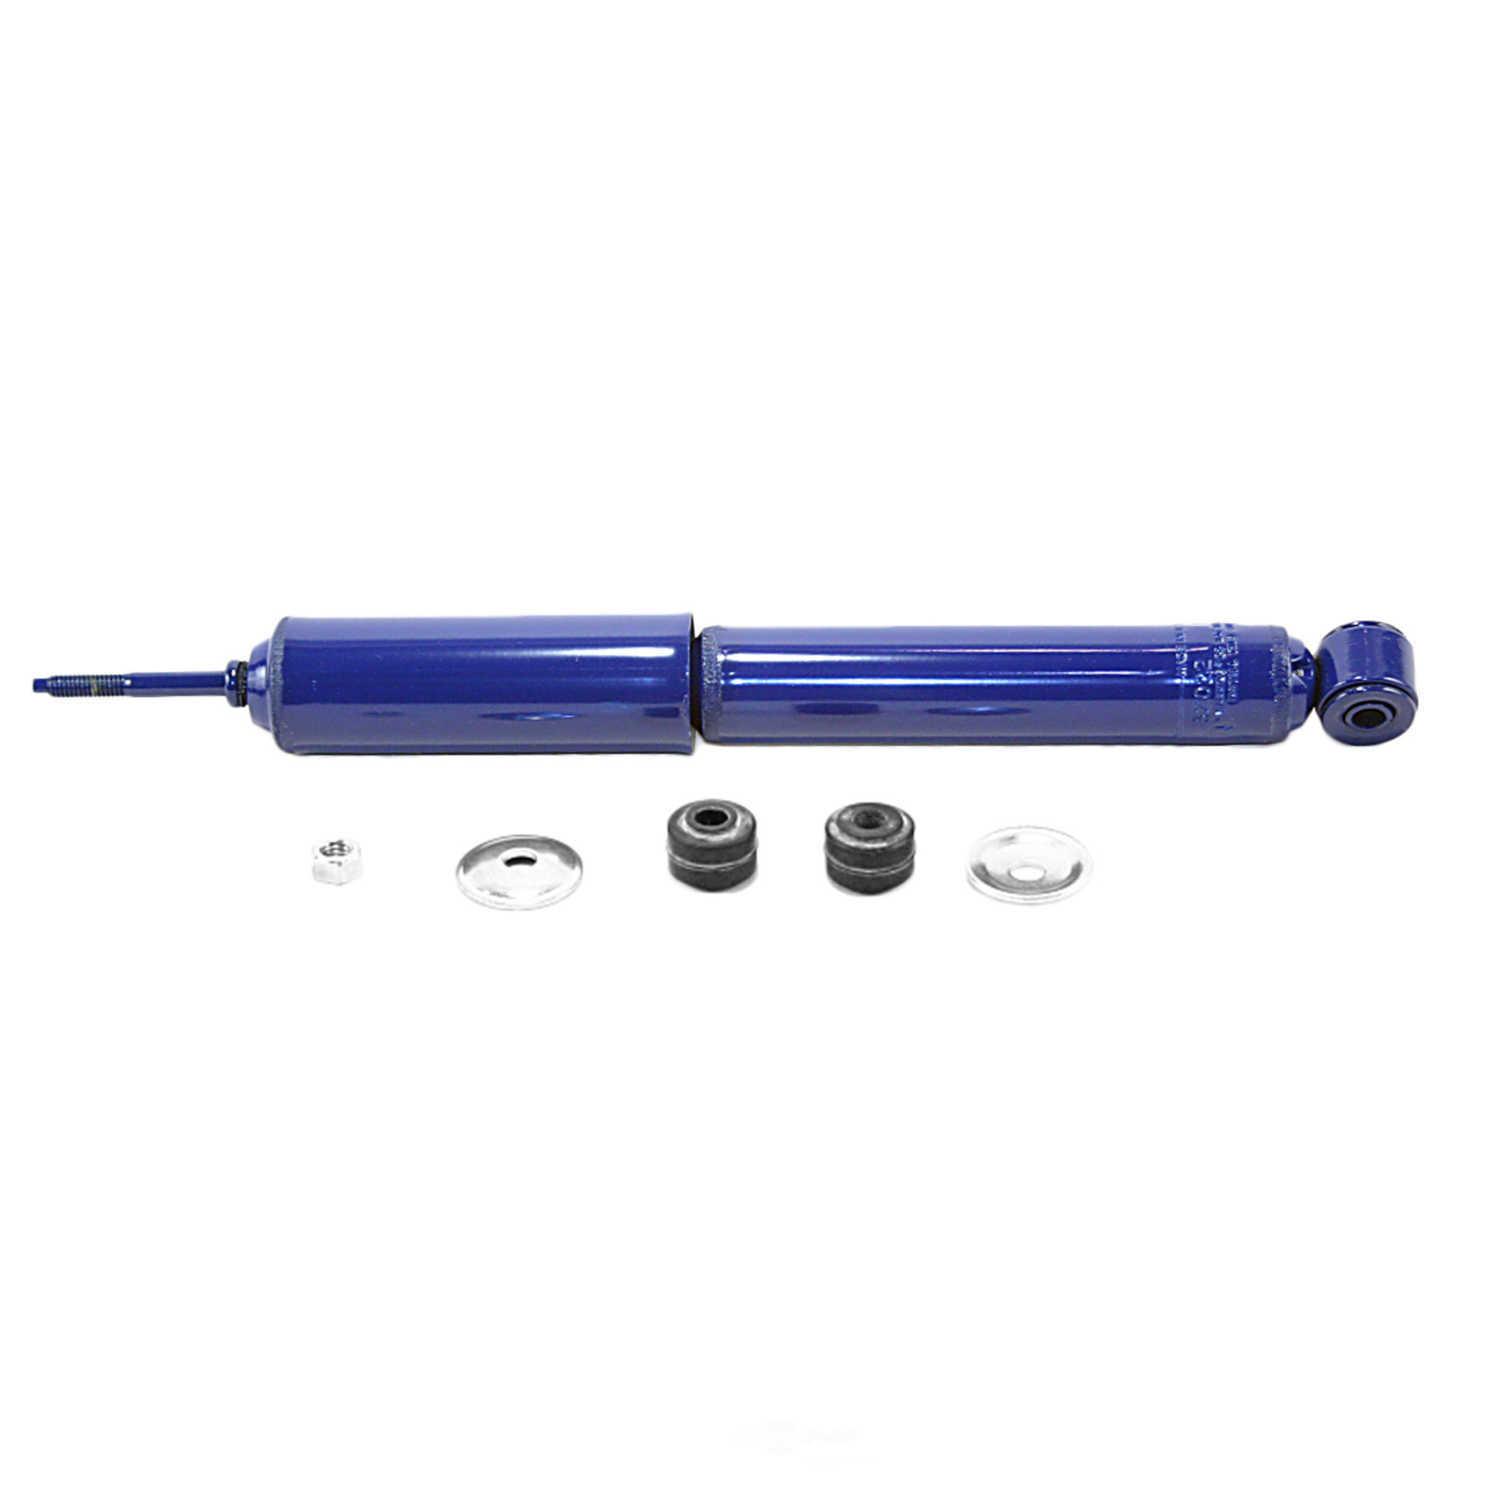 MONROE SHOCKS/STRUTS - Monro-Matic Plus Shock Absorber (With ABS Brakes, Front) - MOE 32022